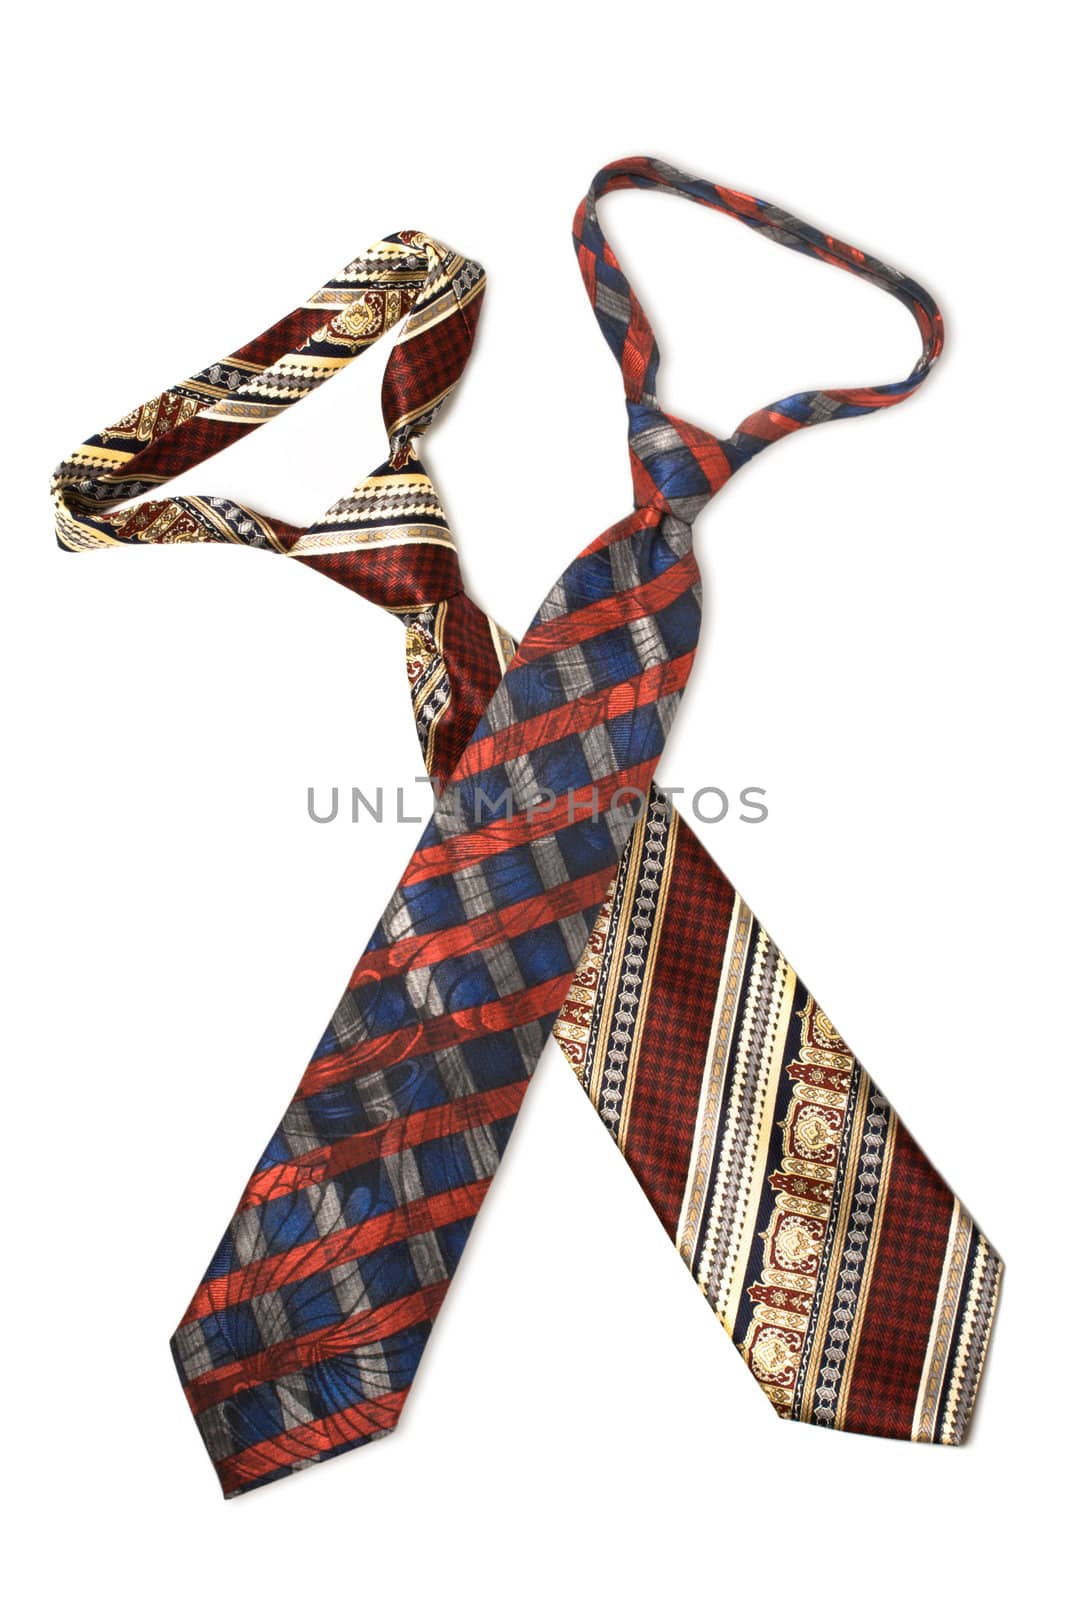 Two neckties isolated by dimol